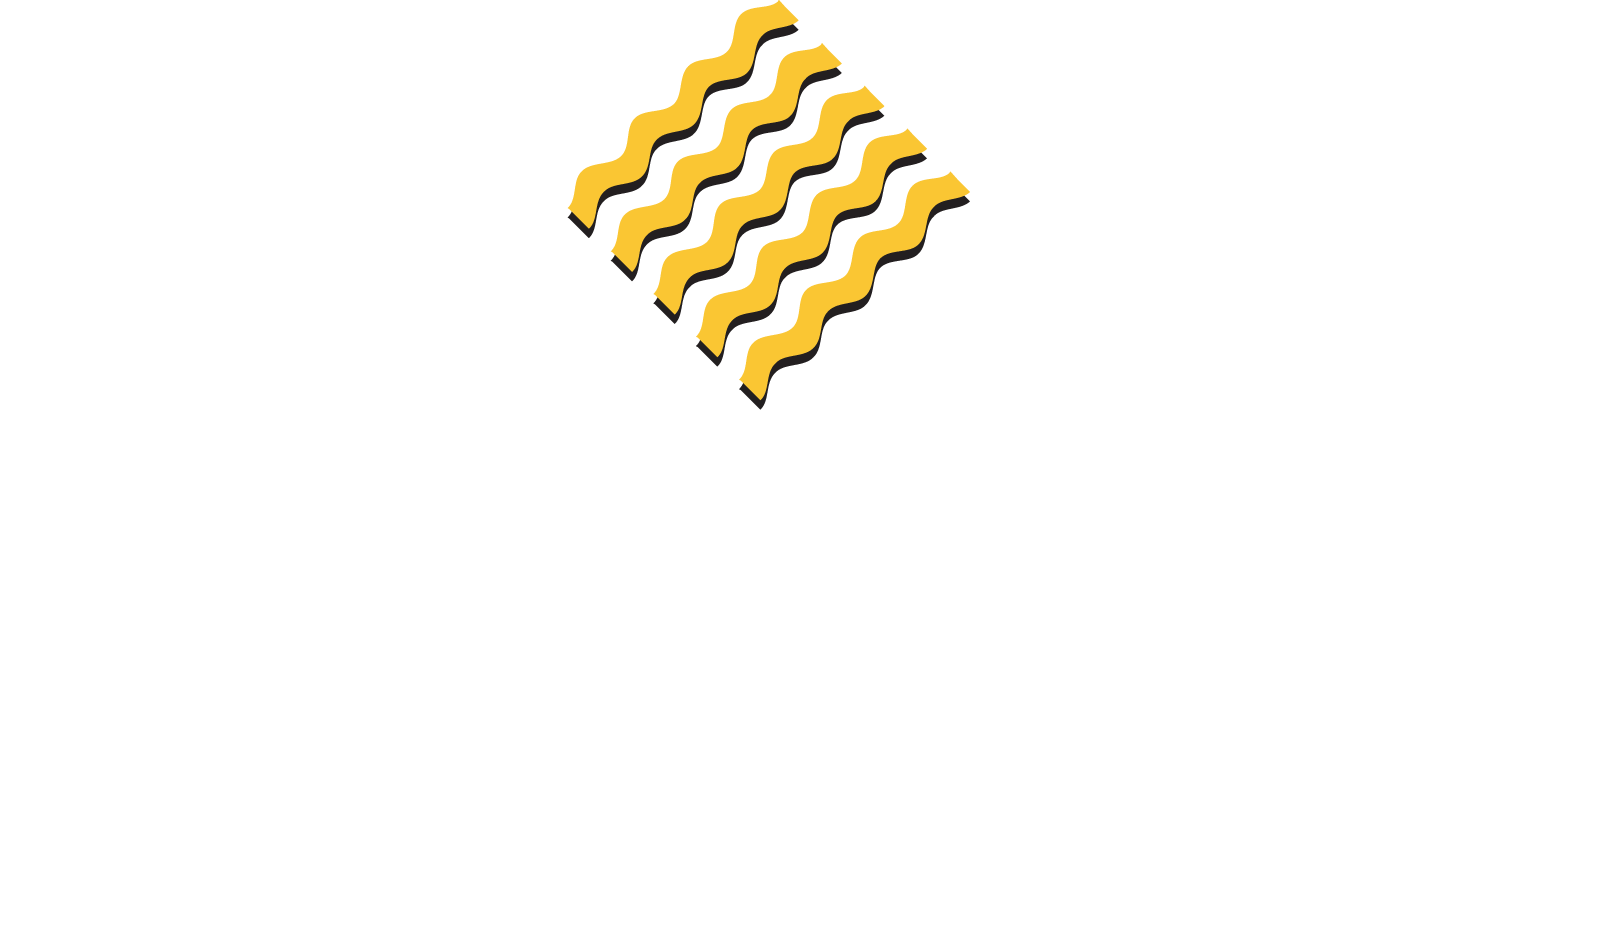 Graphic Marking Systems